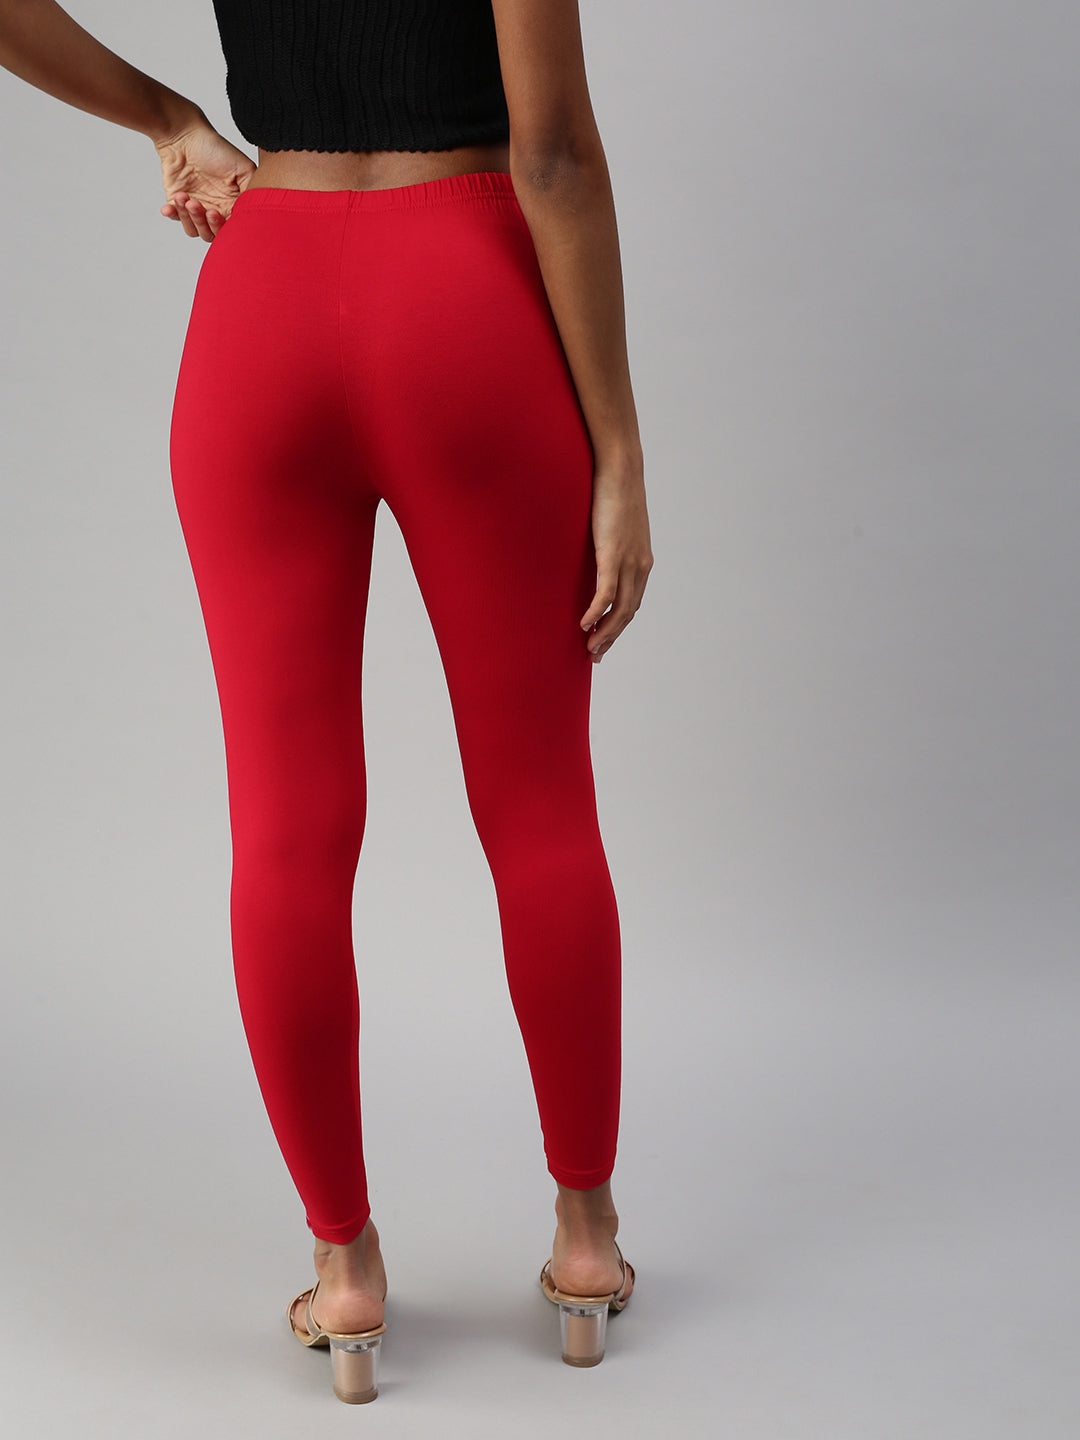 Apple Plain Red Cotton Leggings, Size: M-XXL at Rs 125 in